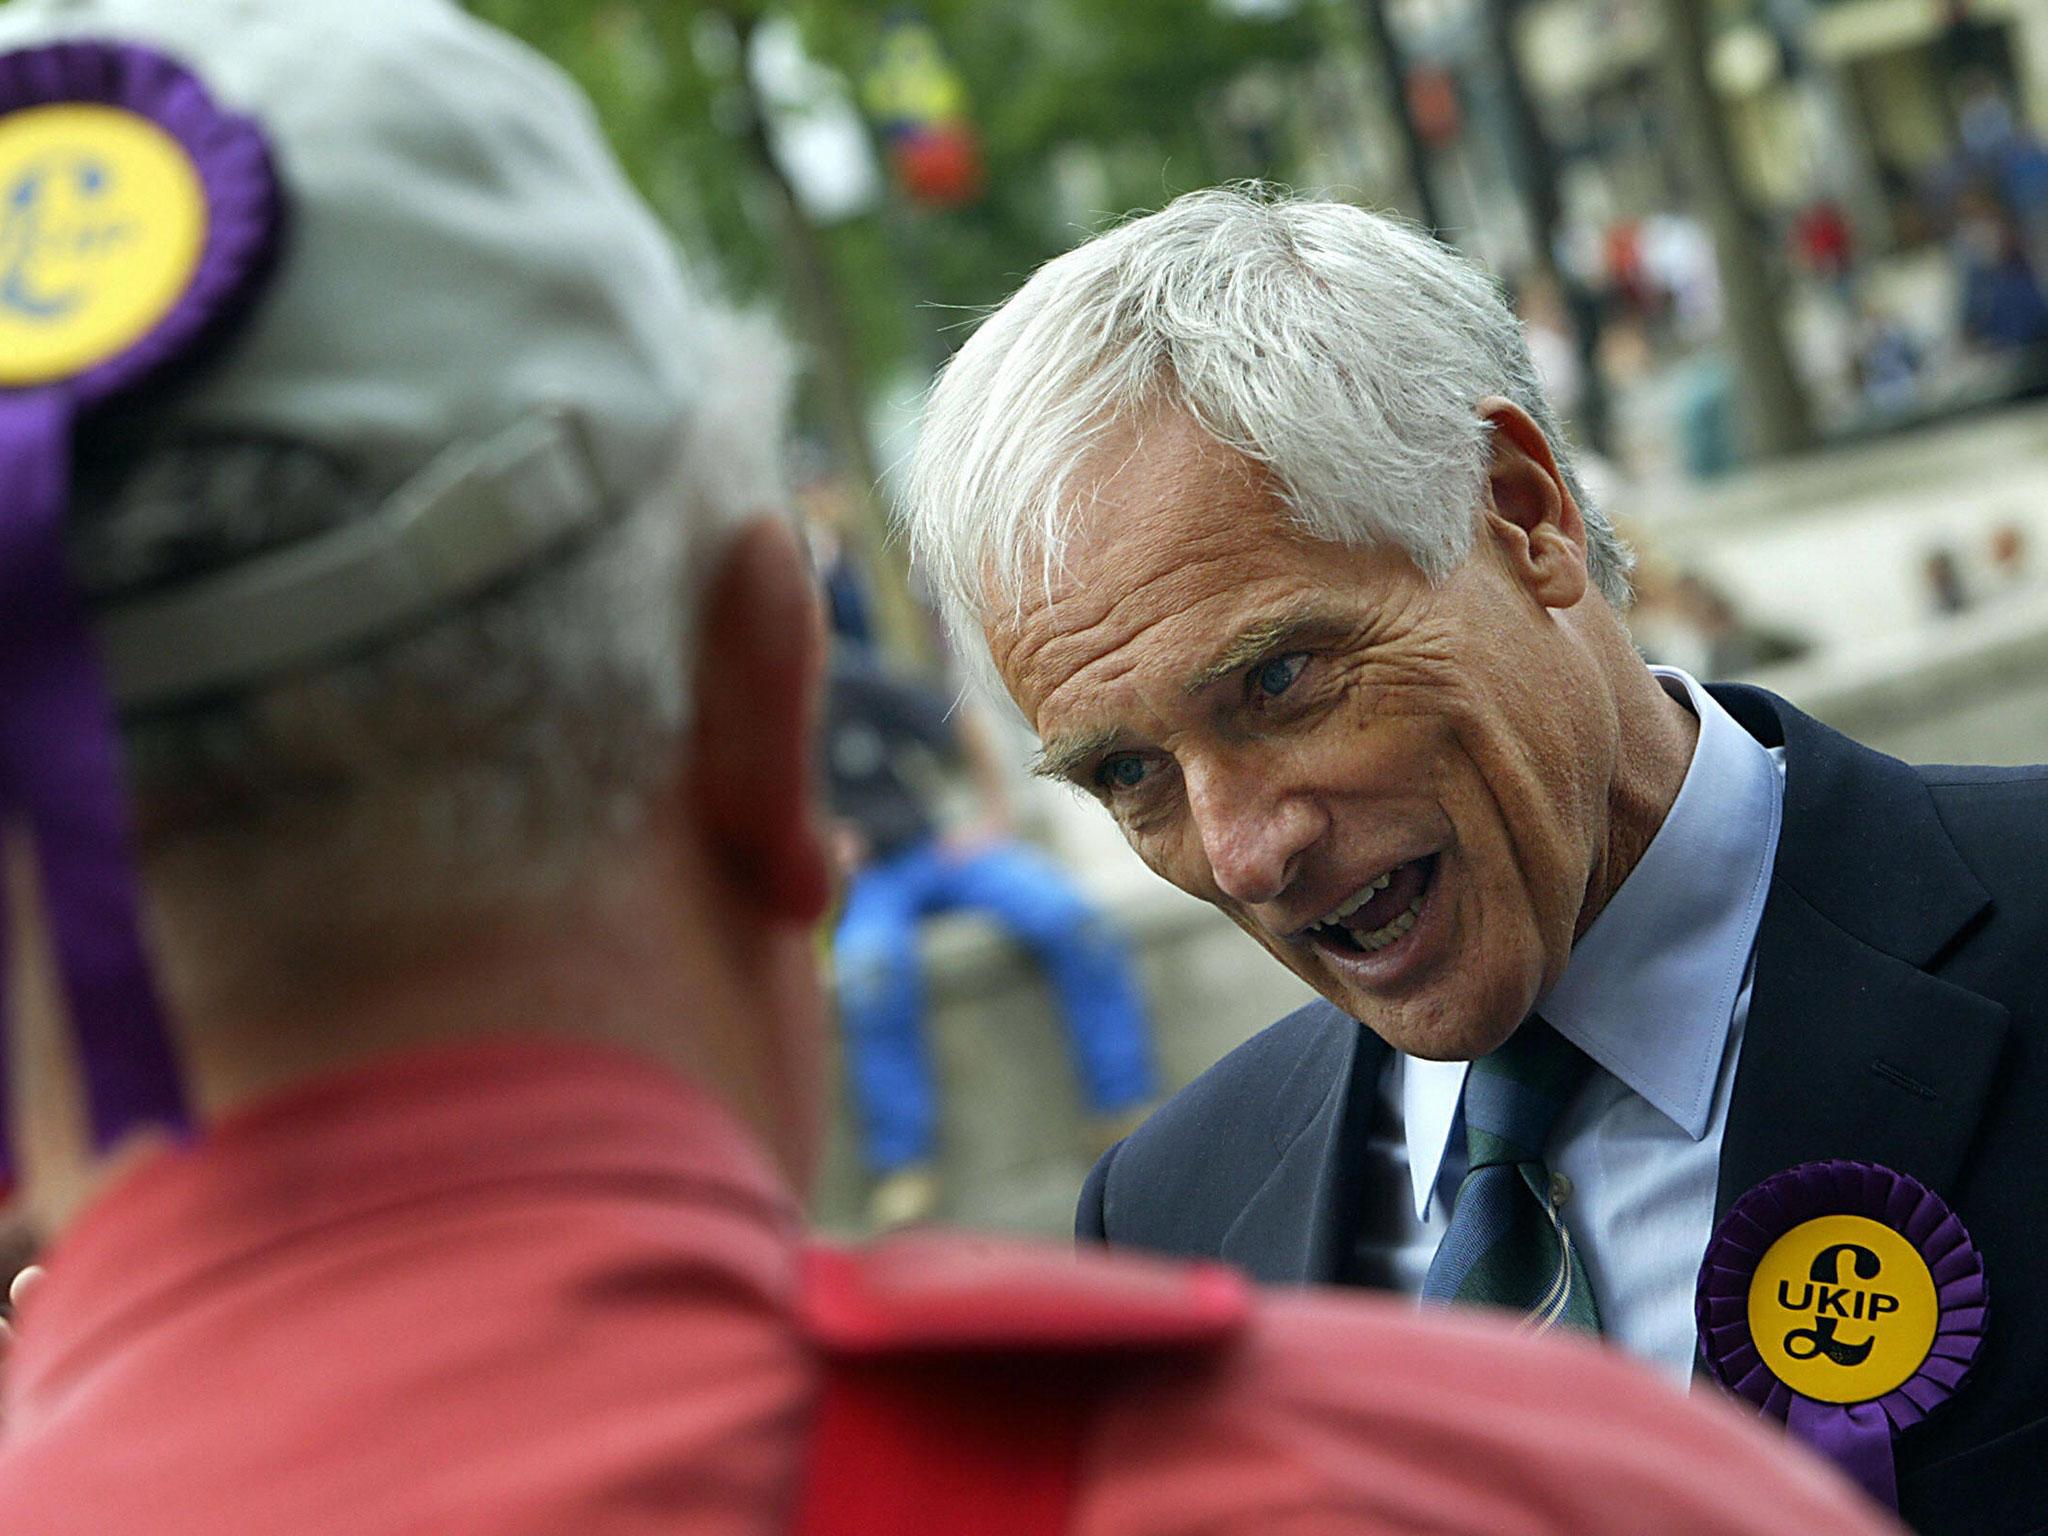 Chatshow host turned politician Robert Kilroy-Silk, once a front runner for UKIP, addresses supporters on the campaign trail in 2004.